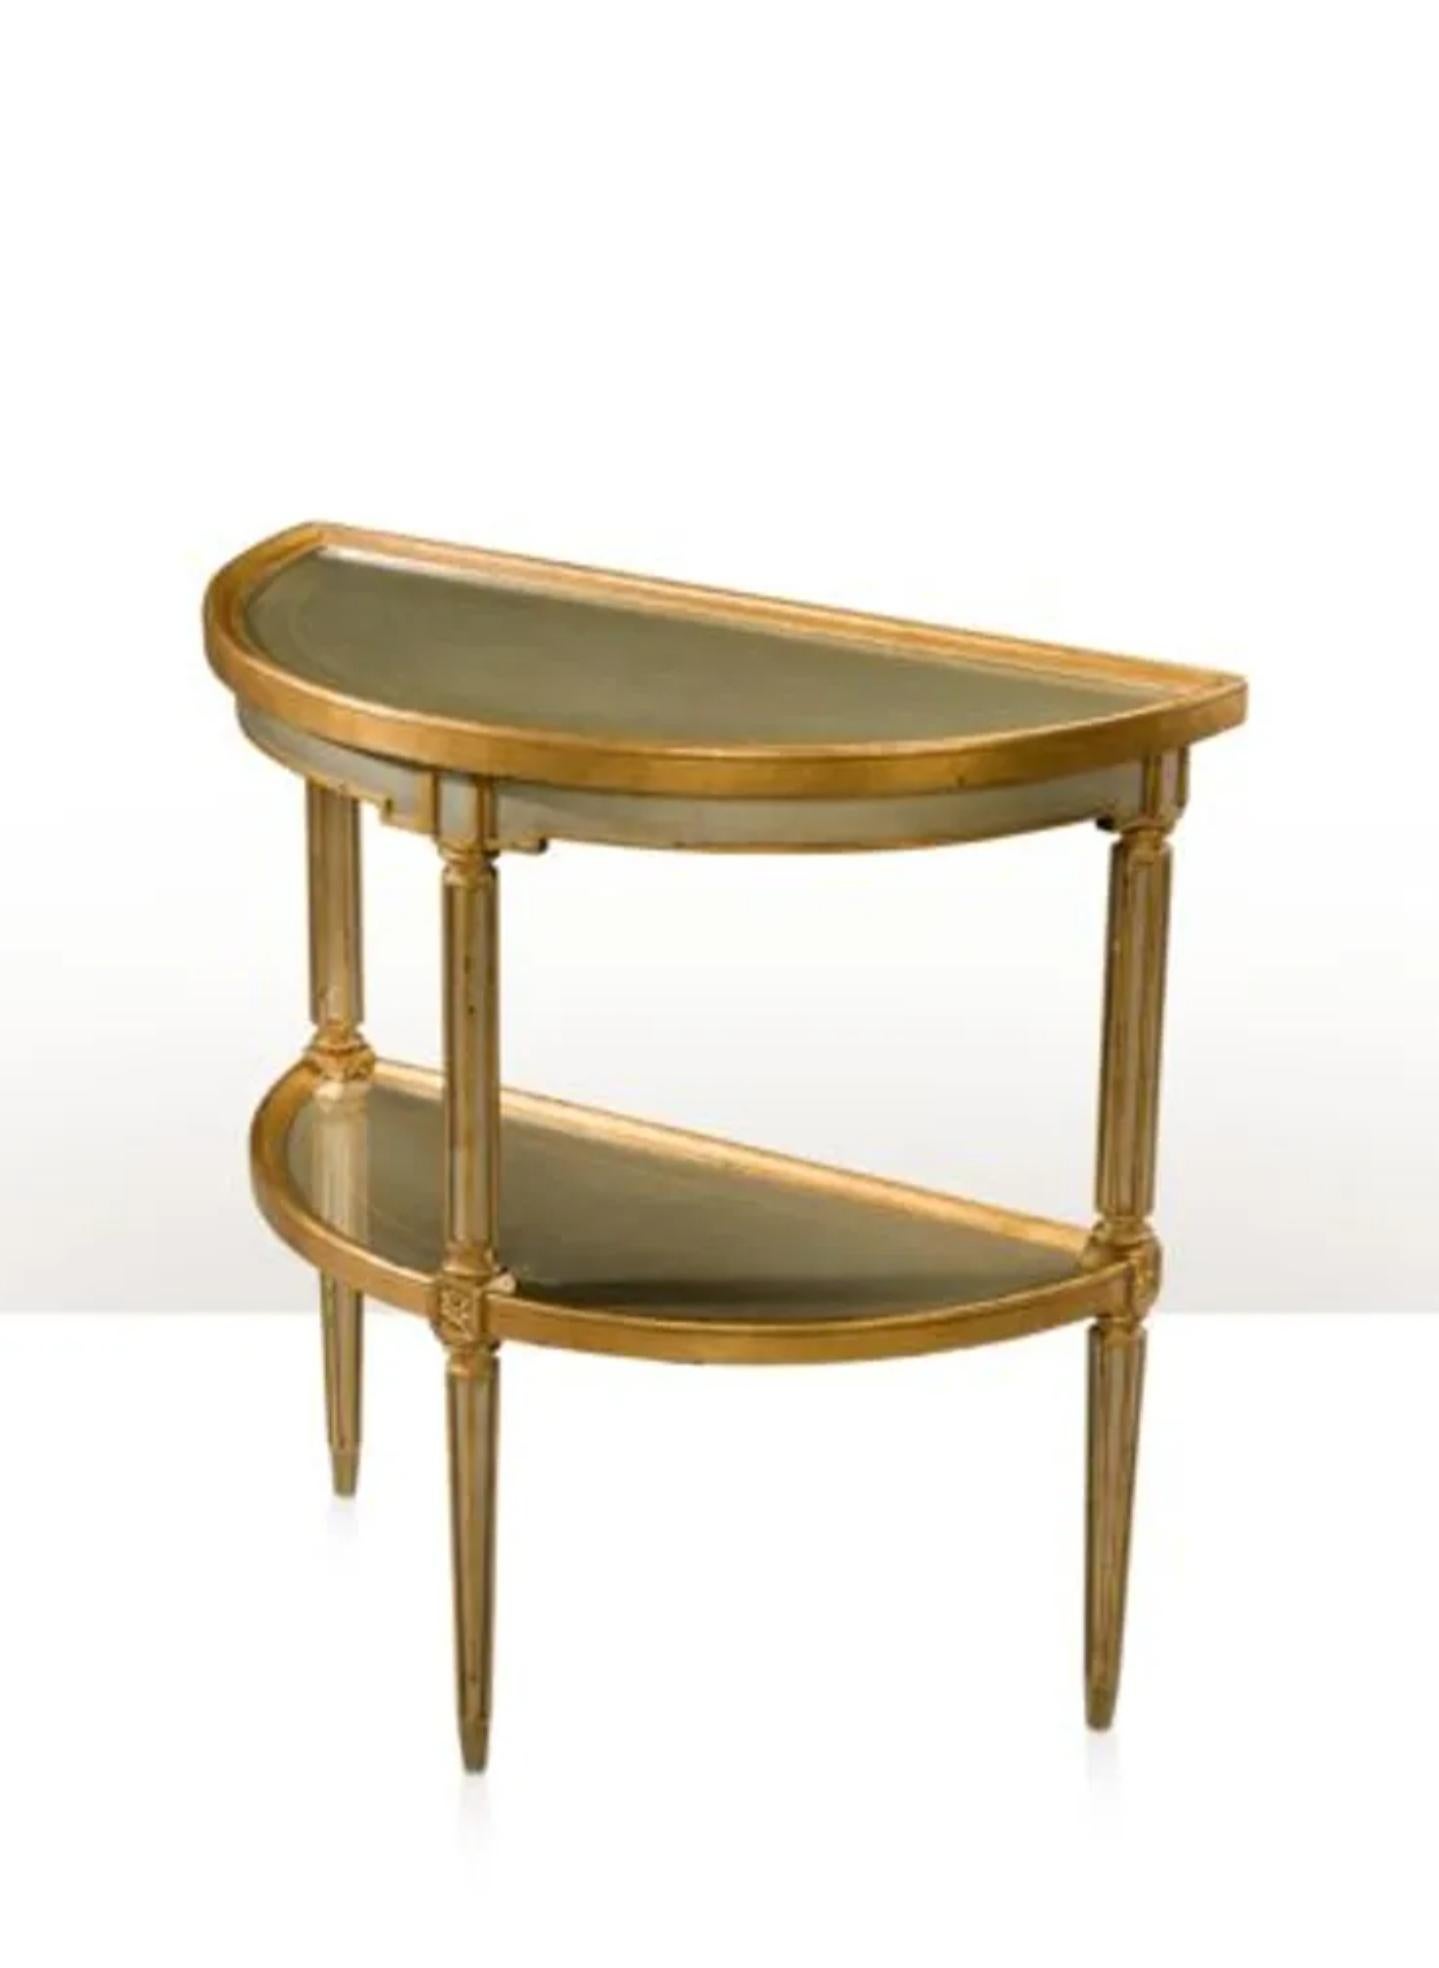 Timeless Italian Style 'Venetian Waters' Eglomise Console Table 5352-006 by fine quality furniture maker Theodore Alexander.

The grandeur of modern day Venice is captured in the look of the Theodore Alexander églomisé Venetian Waters Console Table,